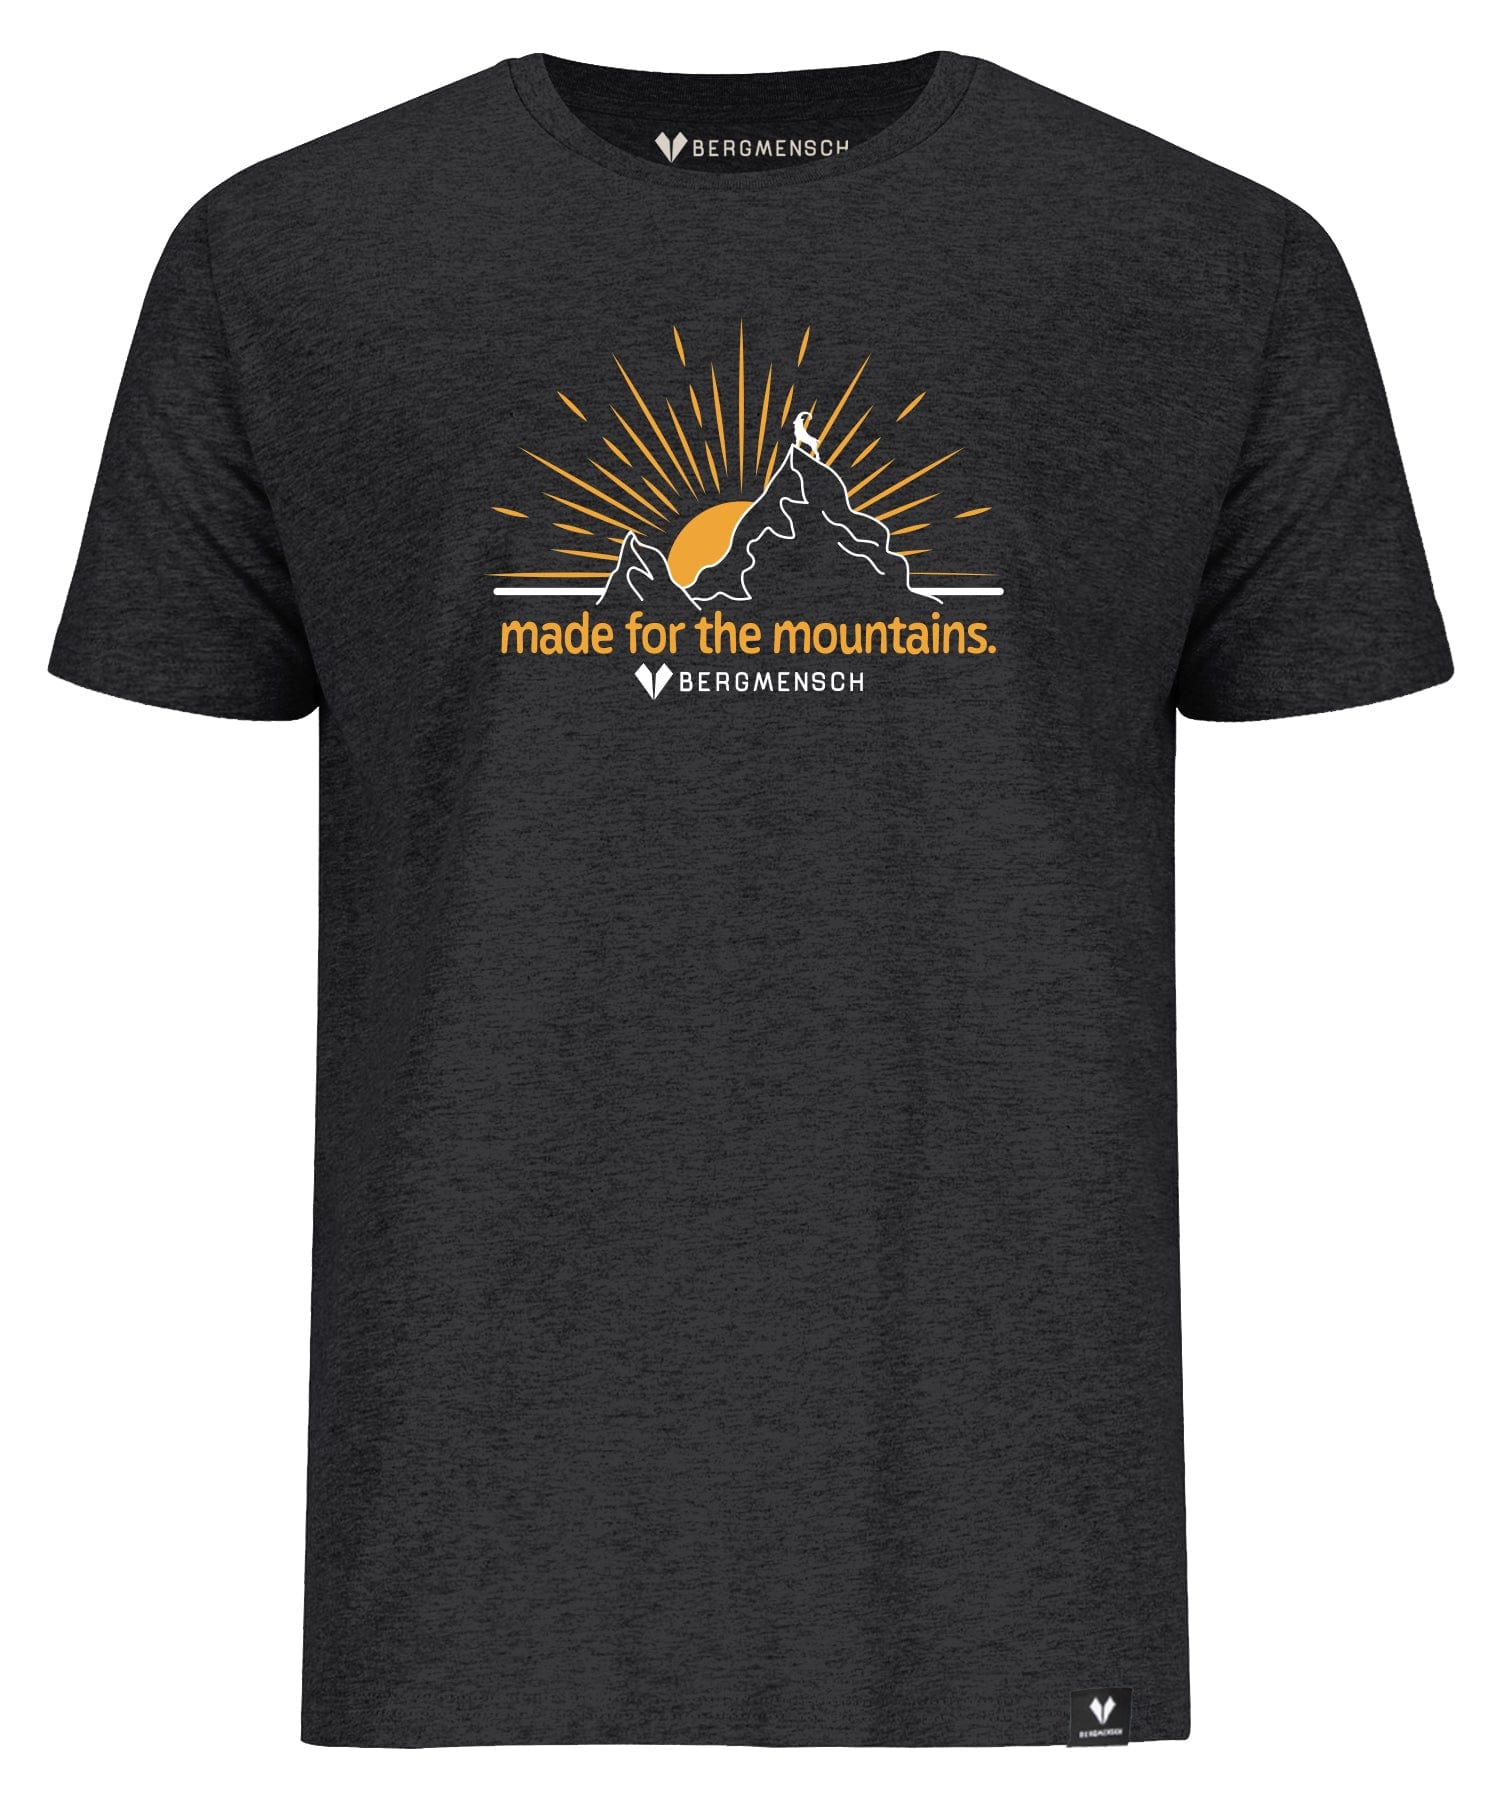 Made for the mountains - Unisex Premium Organic Shirt